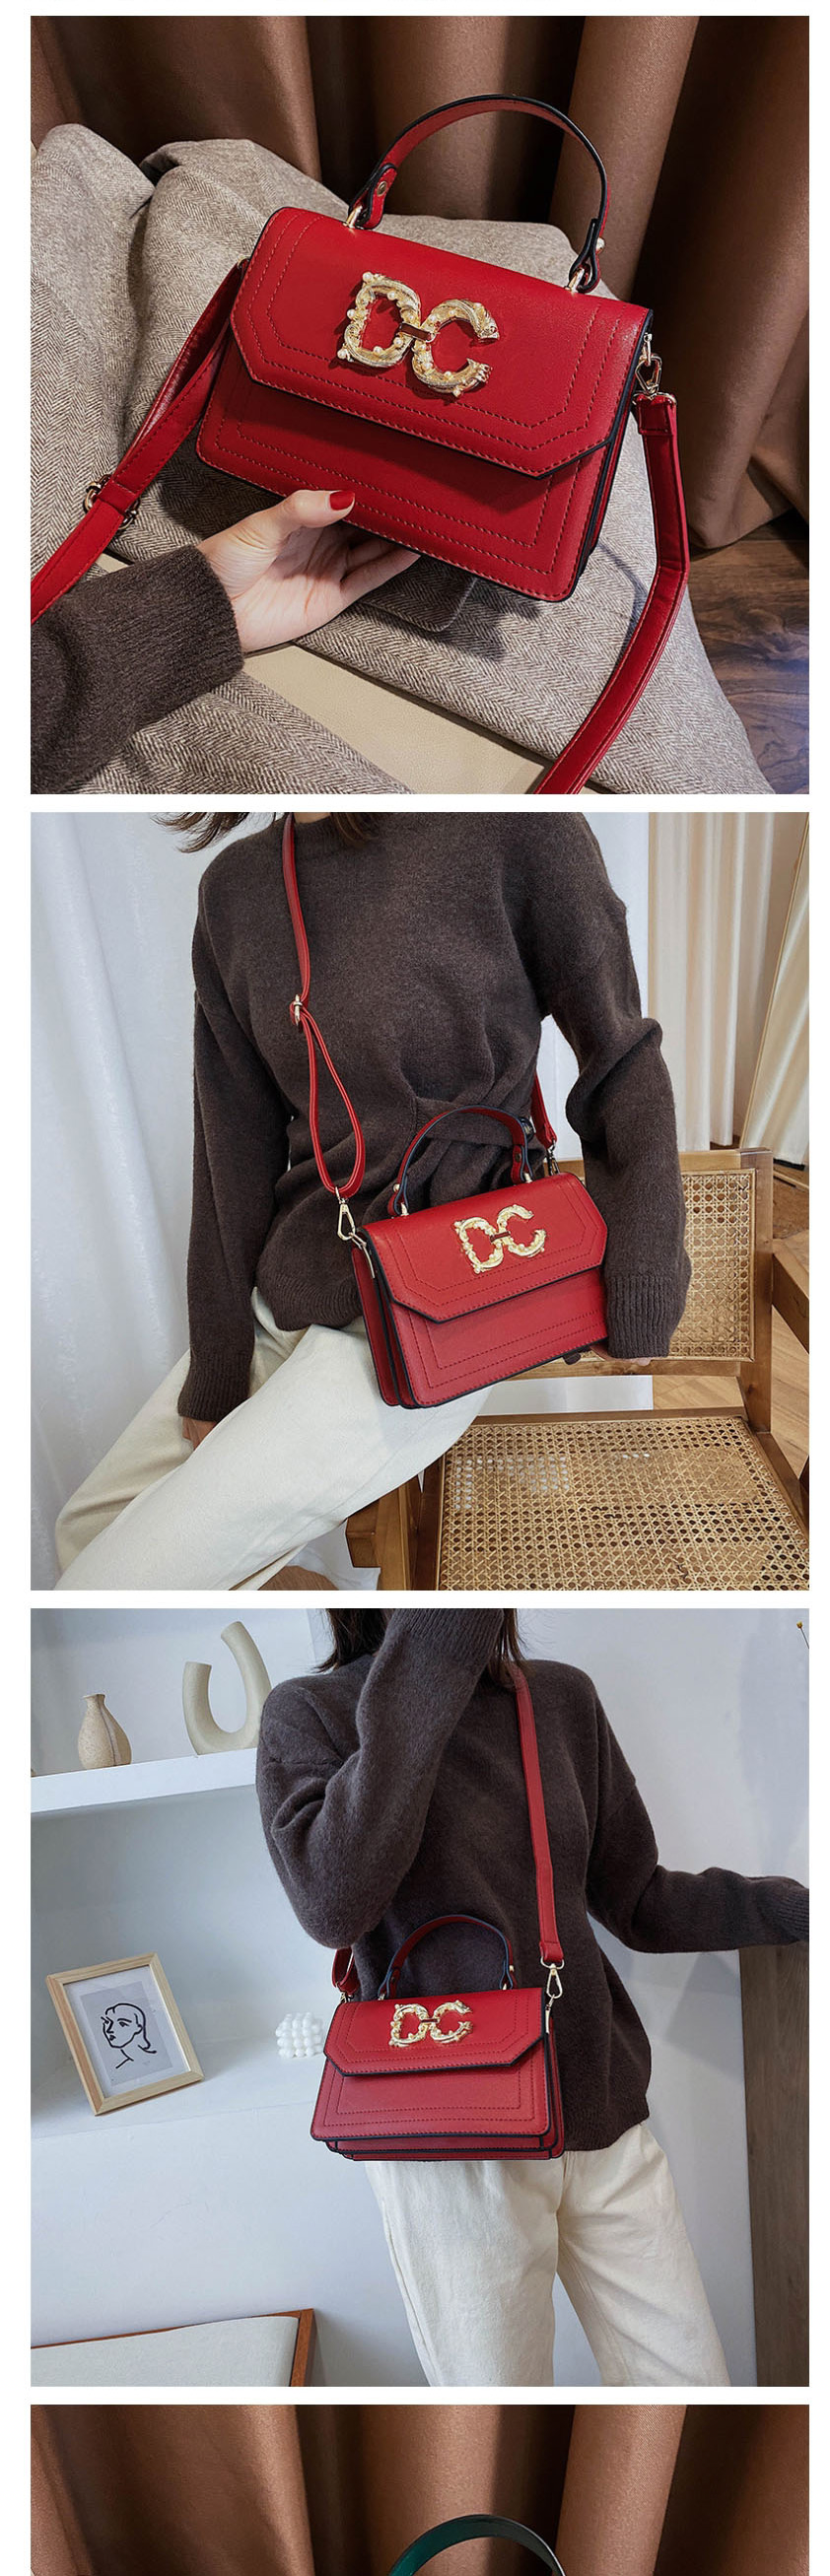 Fashion Red Flap Stitched Crossbody Bag,Shoulder bags